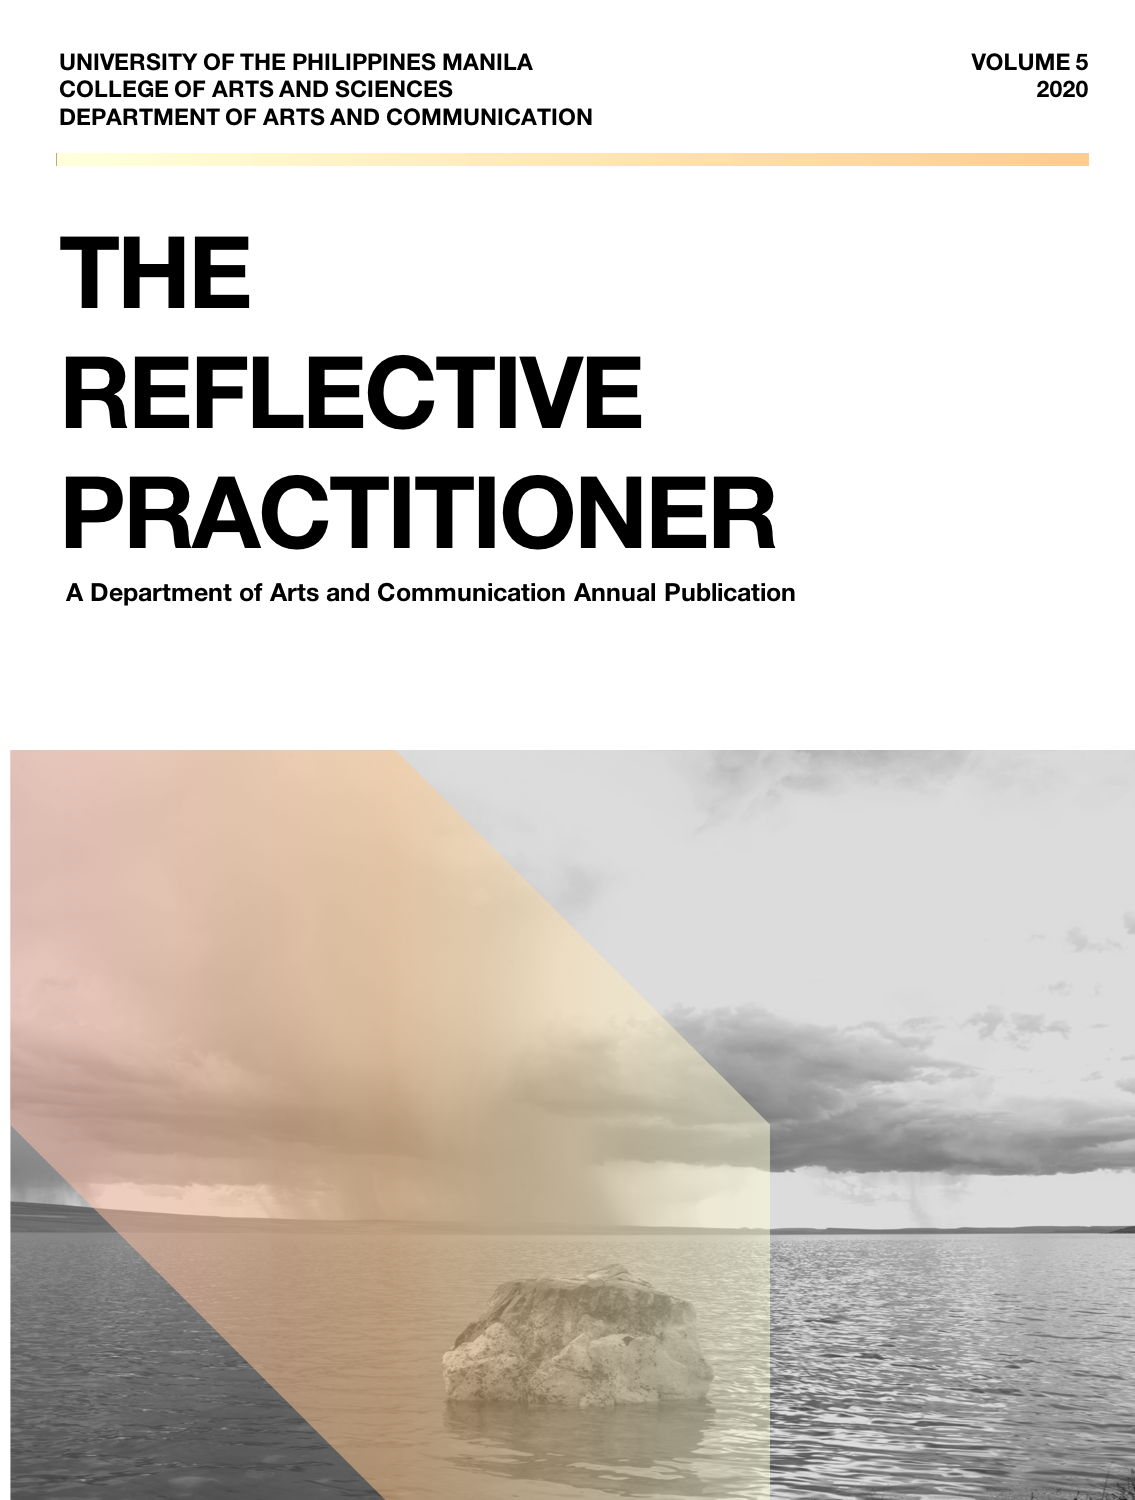 					View Vol. 5 (2020): The Reflective Practitioner
				